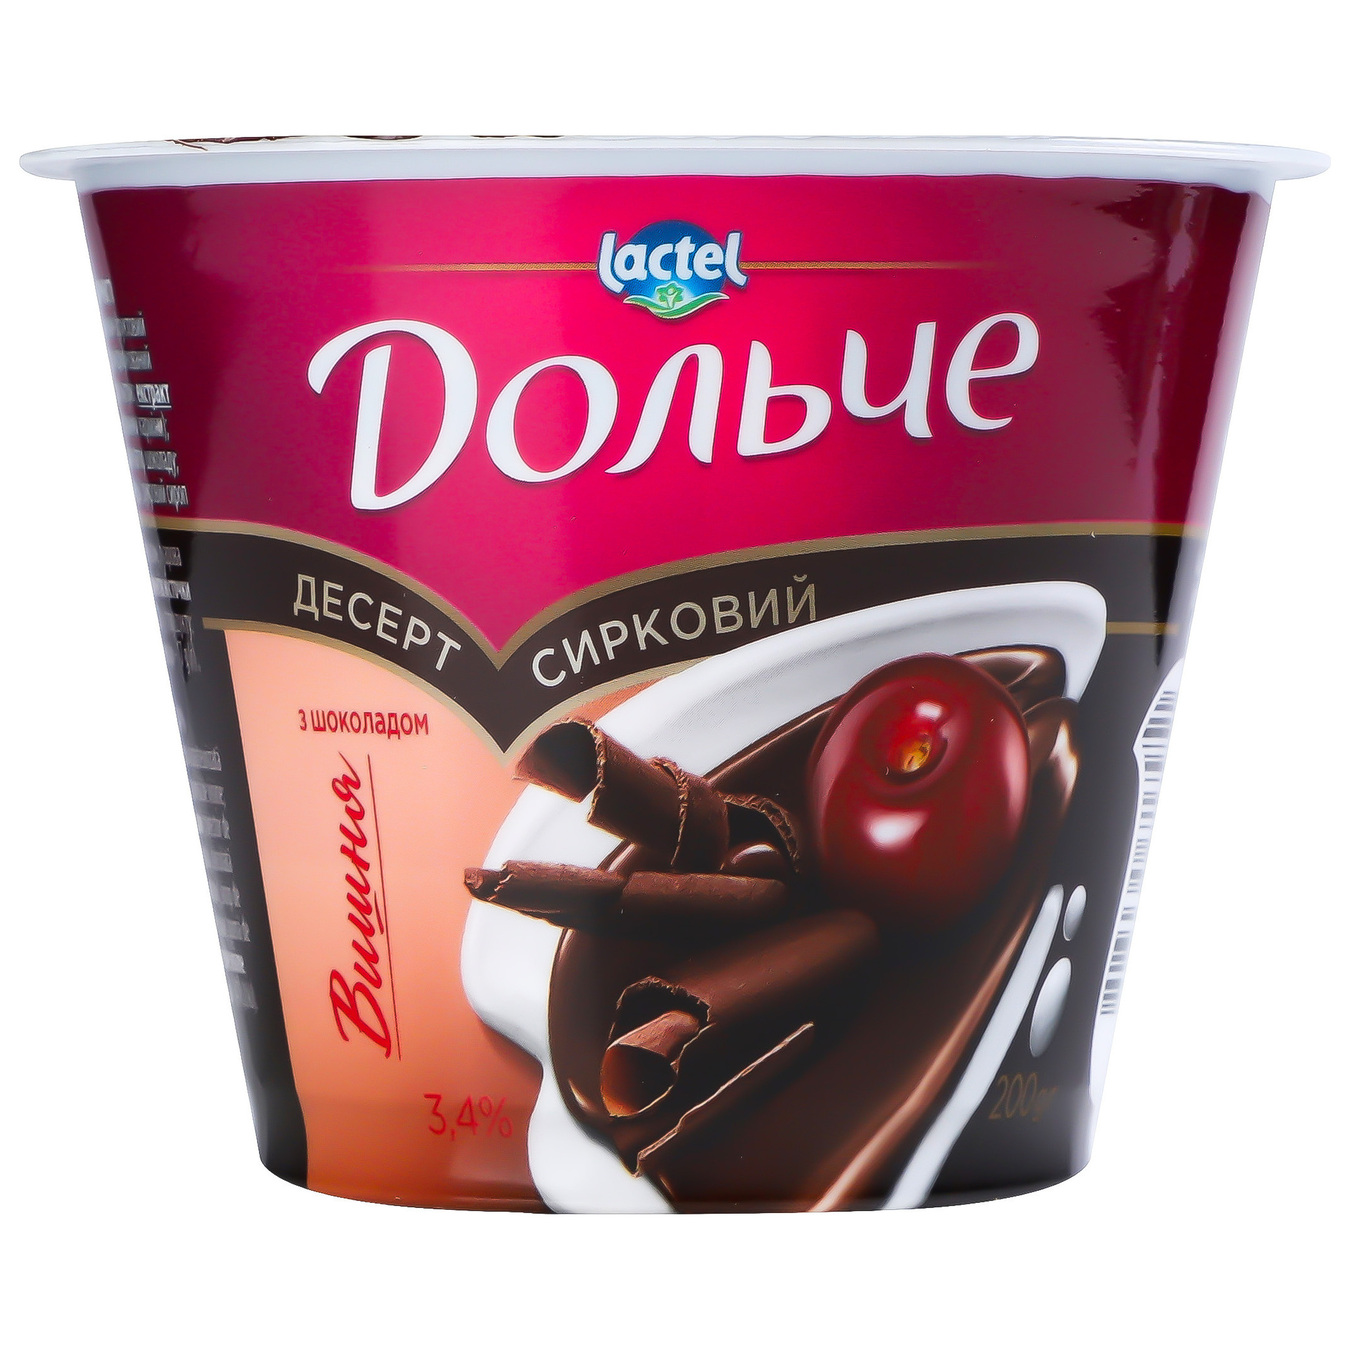 Dolce Cherry Flavored Cottage Cheese Dessert with Chocolate 3,4% 200g